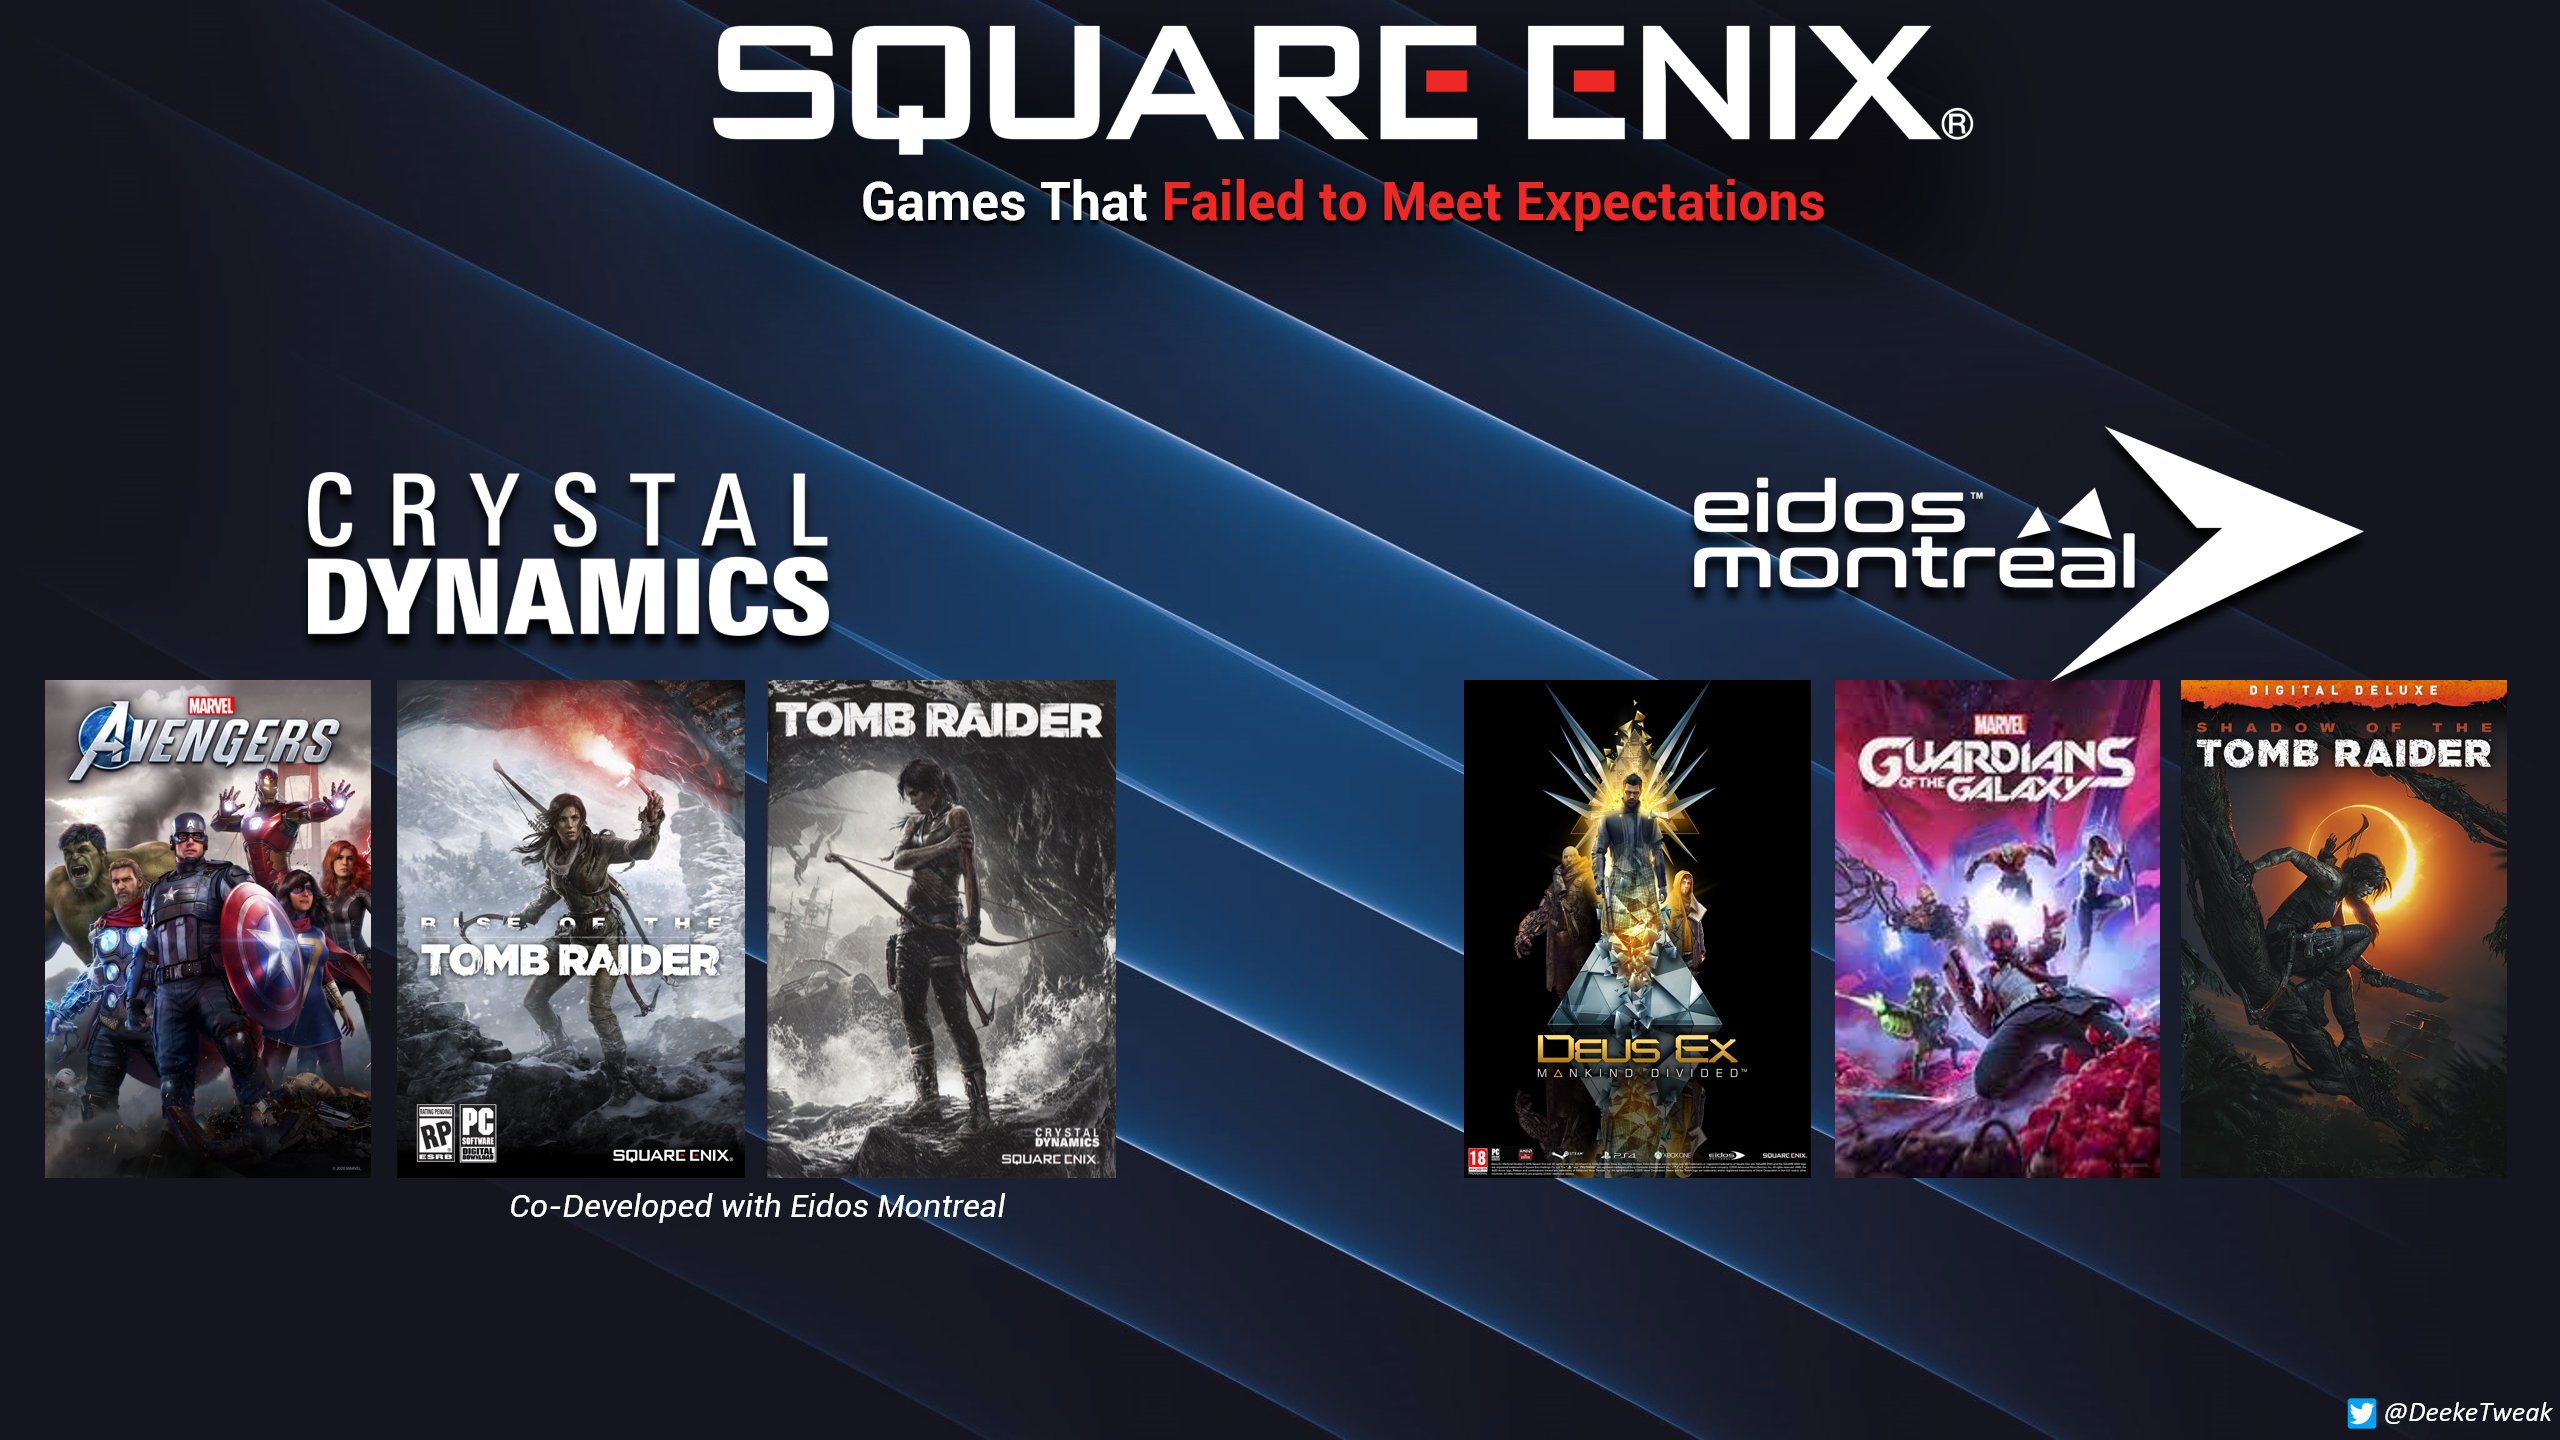 Square Enix Europe - Top Game DevelopersTop Game Developers